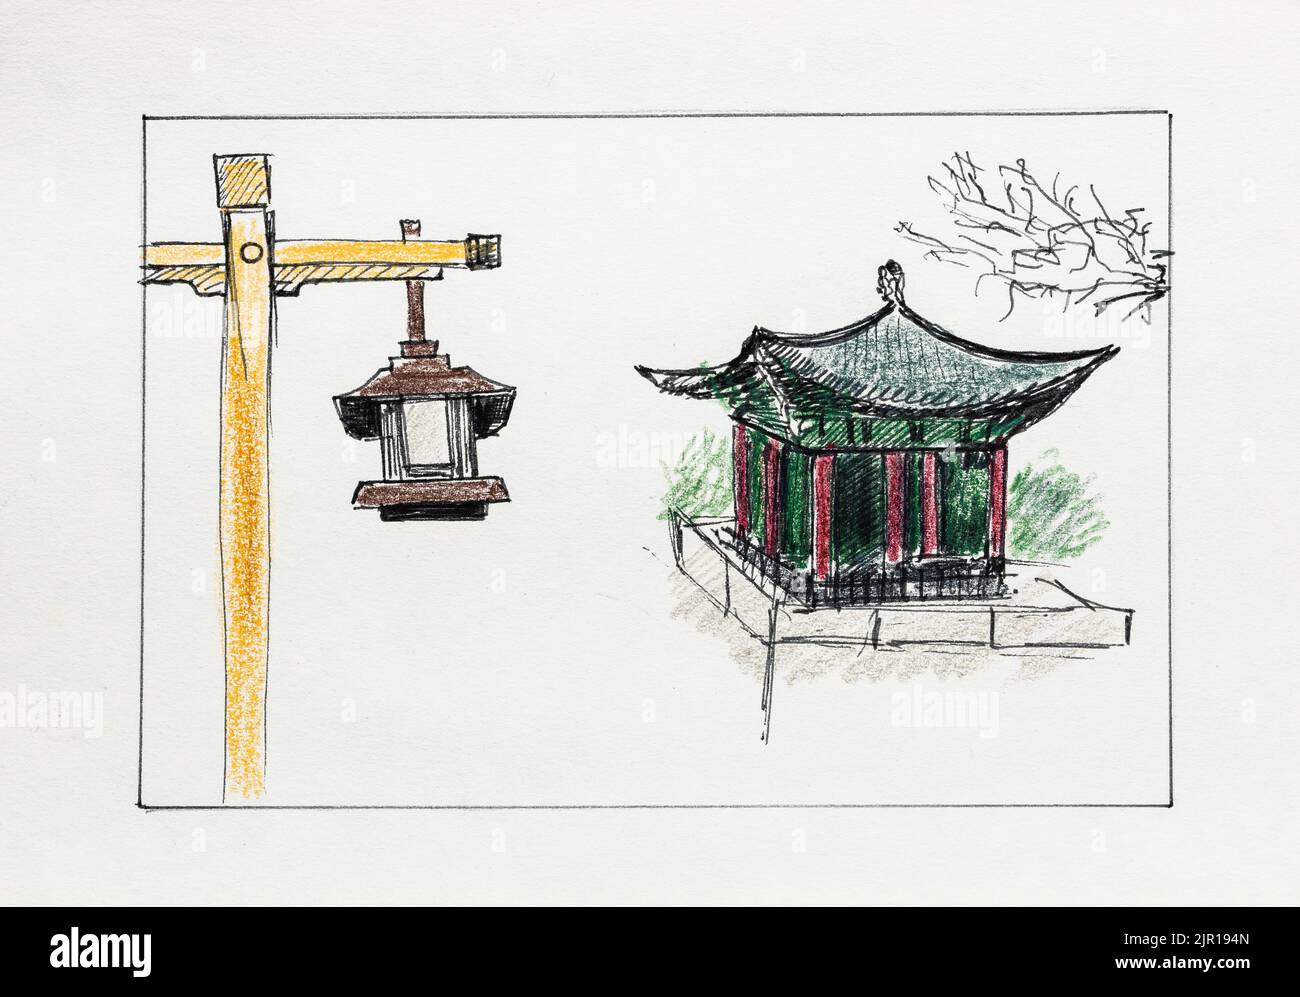 hand-drawn Chinese pagoda and lanterns by black pen and color pencils on old textured paper Stock Photo